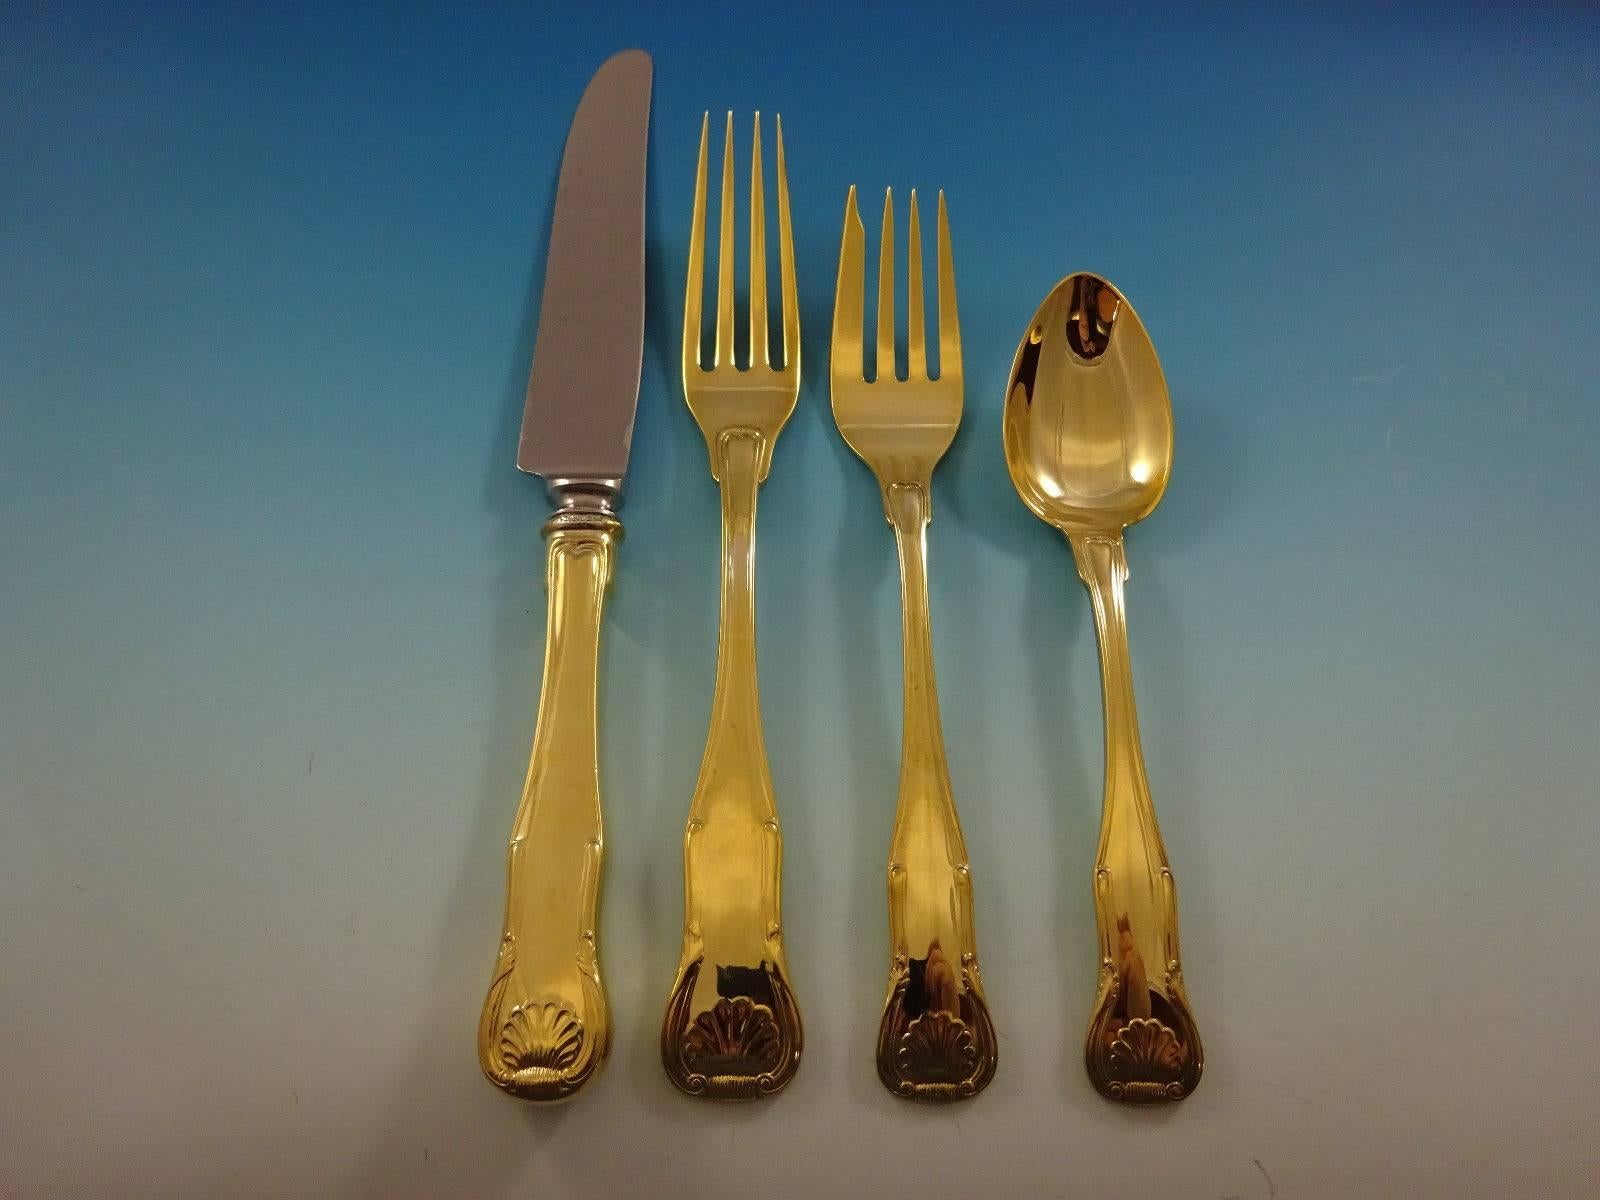 King gold by Kirk Sterling Silver flatware set - 32 pieces. Gold flatware is on trend and makes a bold statement on your table, especially when paired with gold rimmed china and gold accents. 

This set is vermeil (completely gold-washed) and